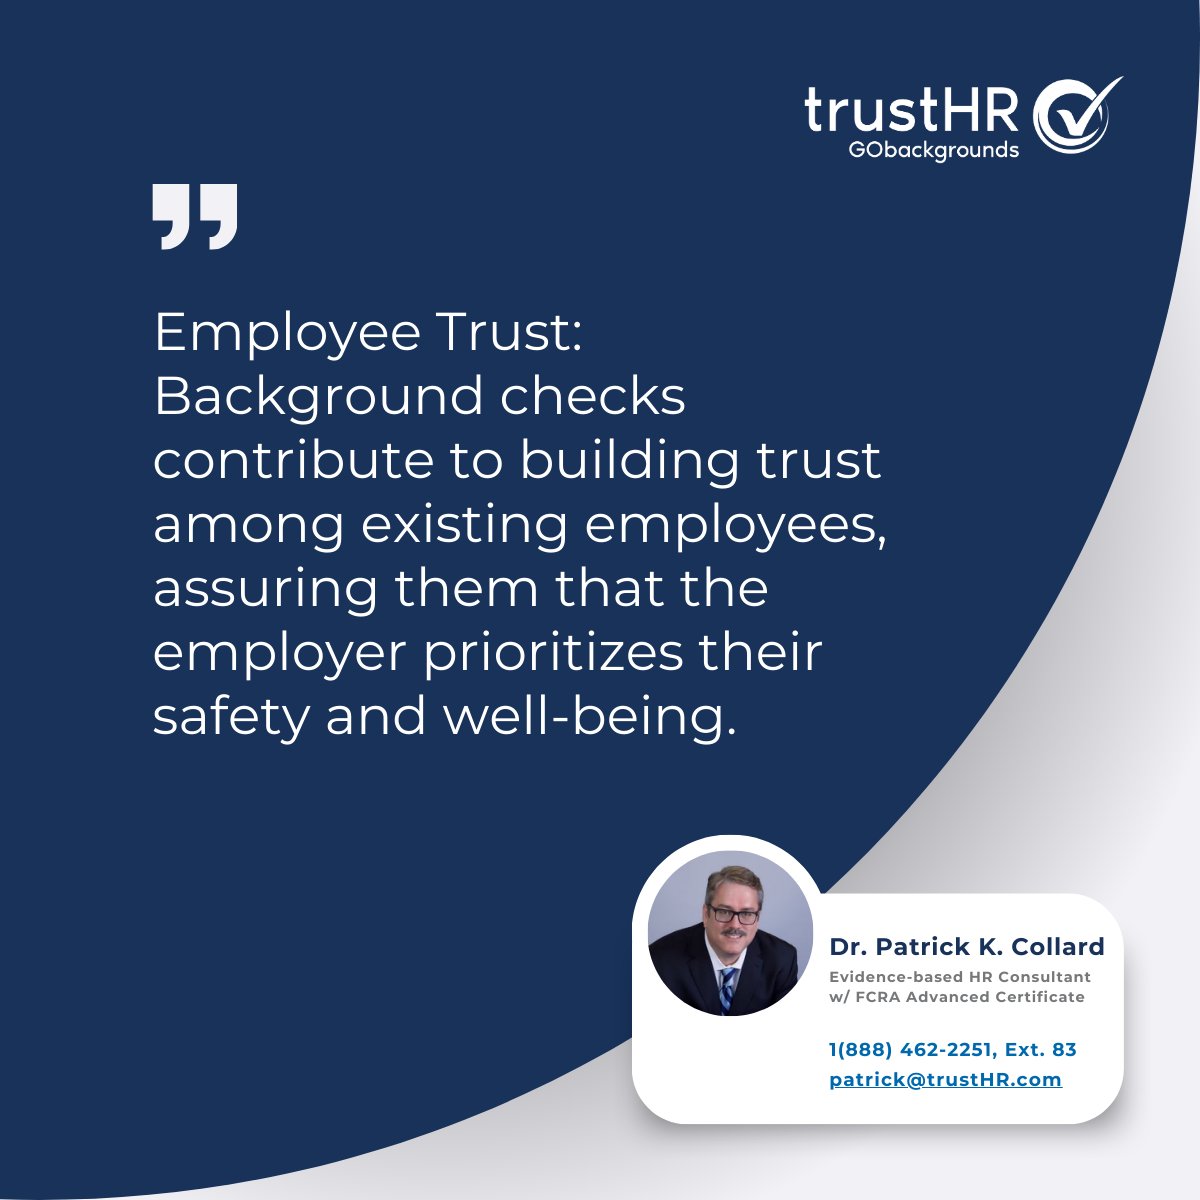 Does your company need quality background checks with fast turnaround times? Contact Dr. Patrick K. Collard today! #backgroundchecks #employmentscreening #criminalchecks